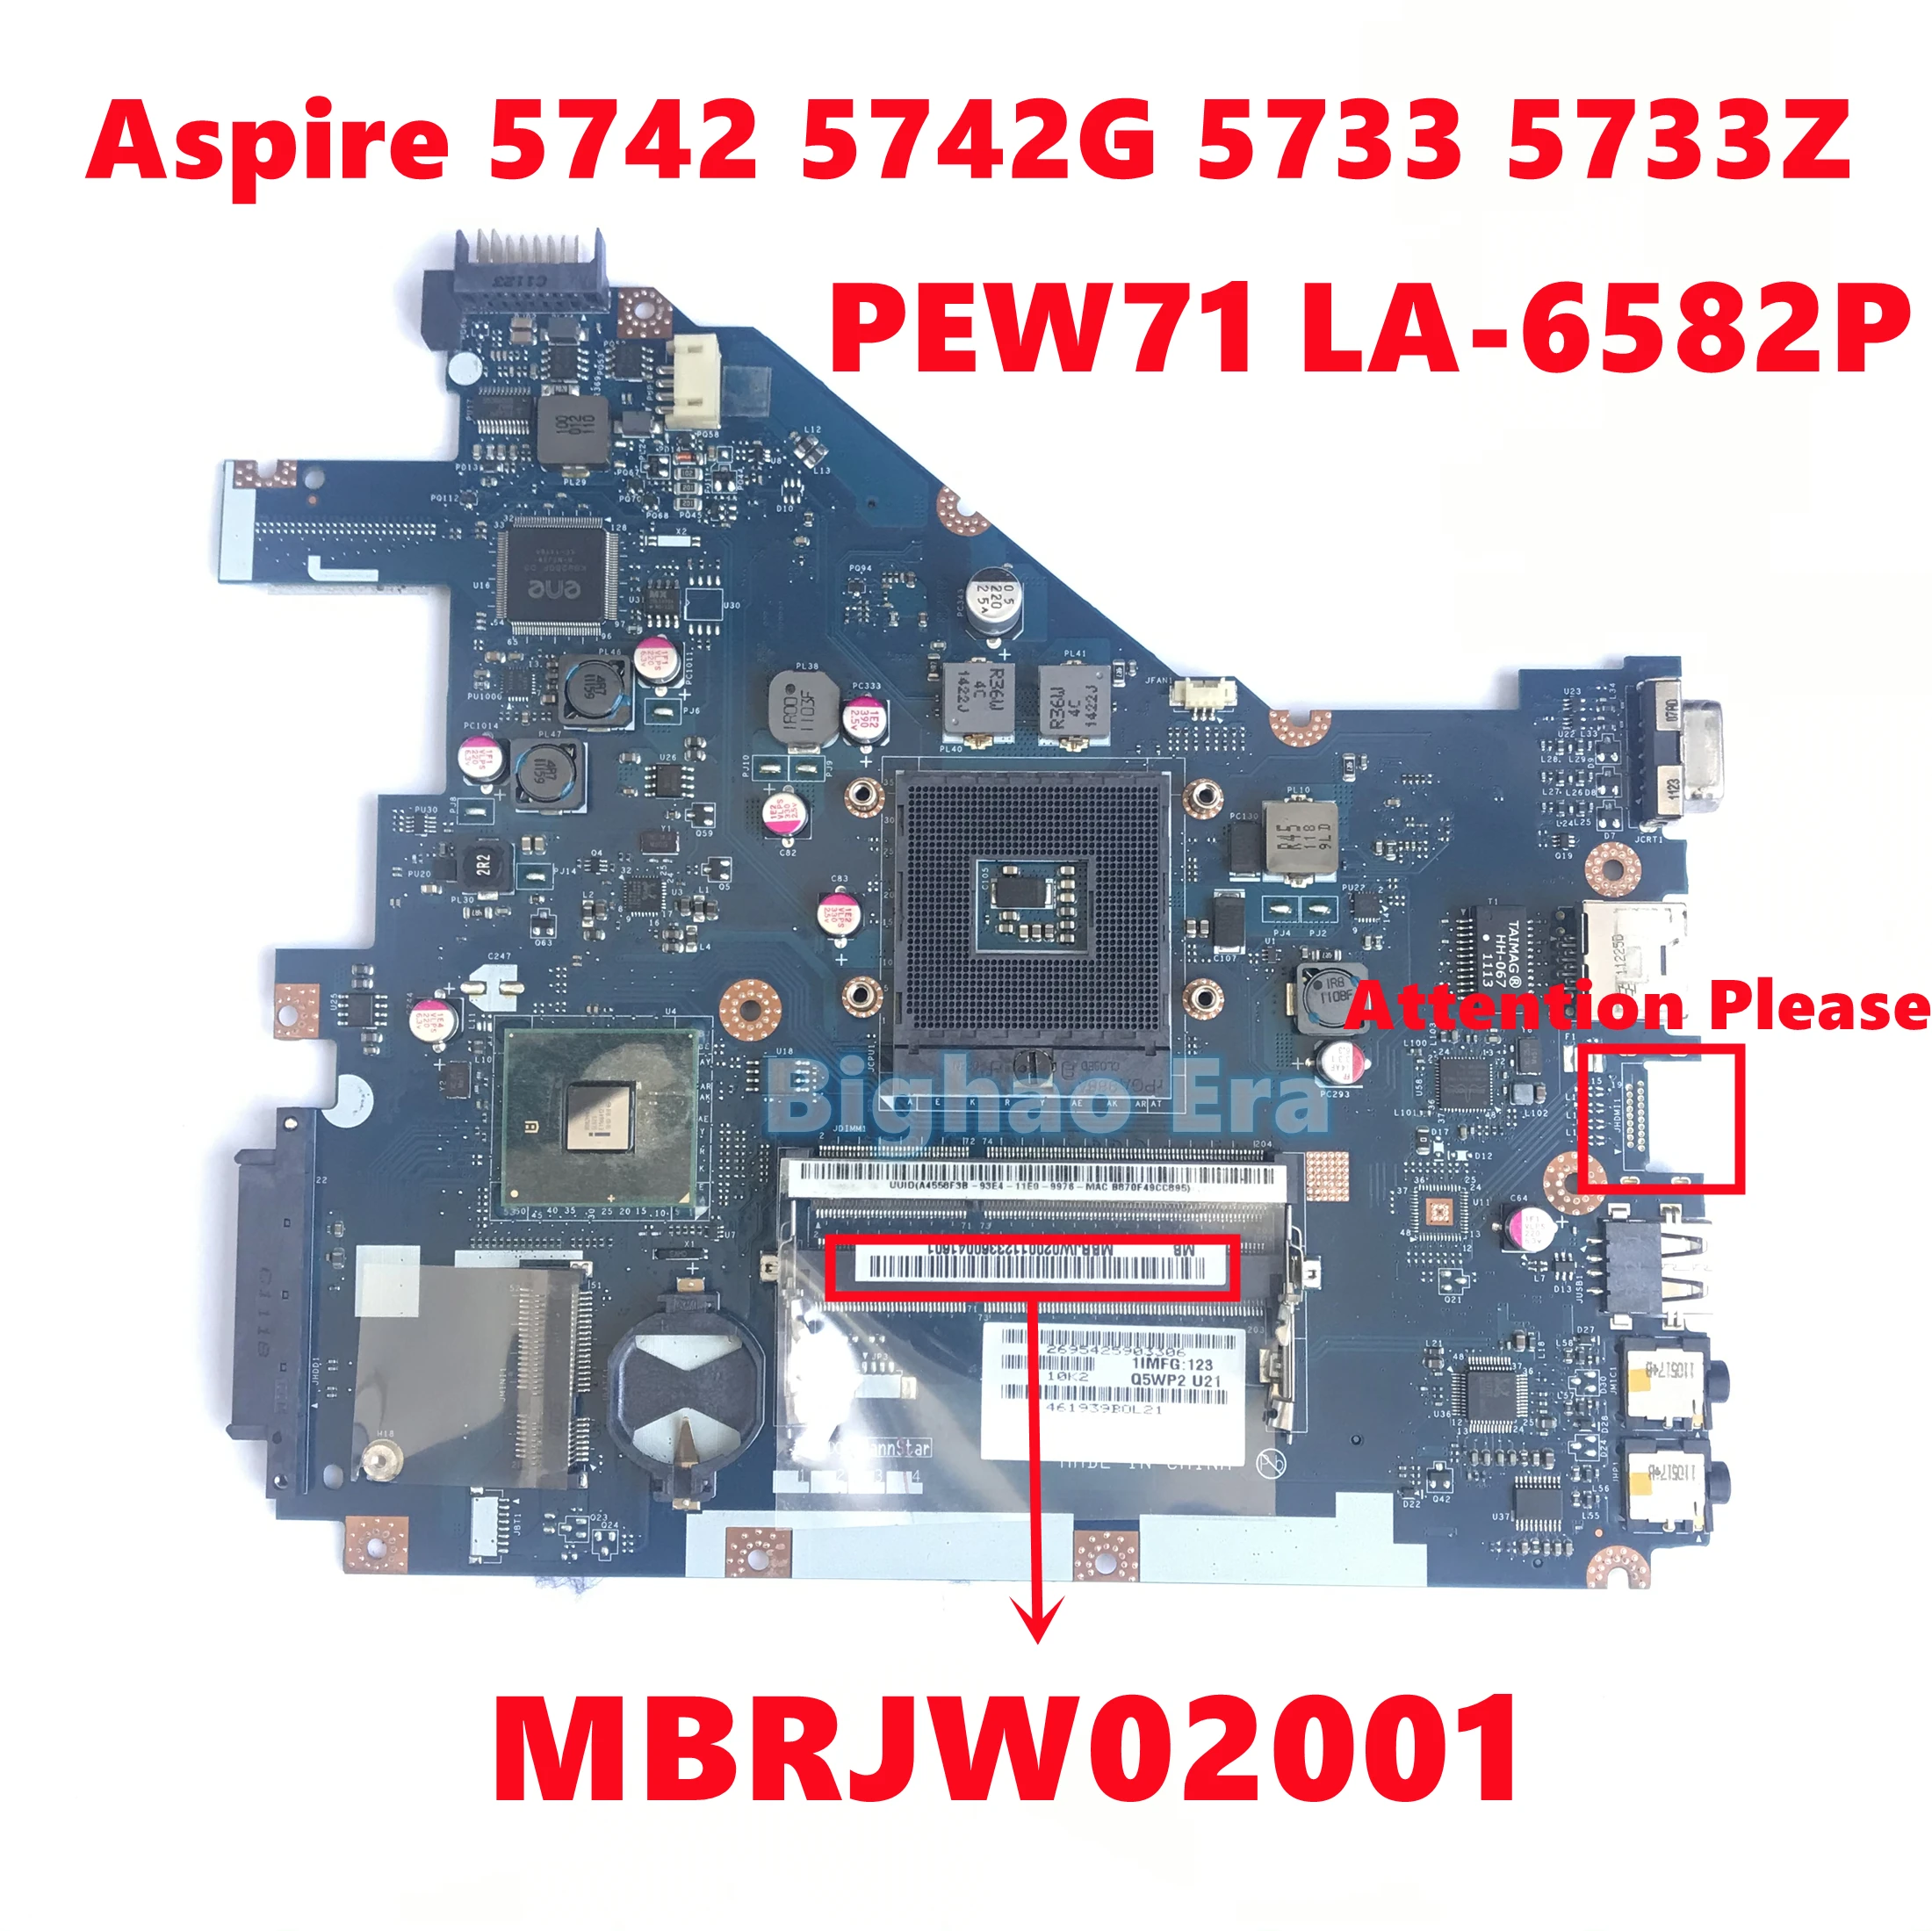 

MBRJW02001 MB.RJW02.001 For Acer Aspire 5742 5742G 5733 5733Z Laptop Motherboard PEW71 LA-6582P Mainboard DDR3 HM55 Fully Tested